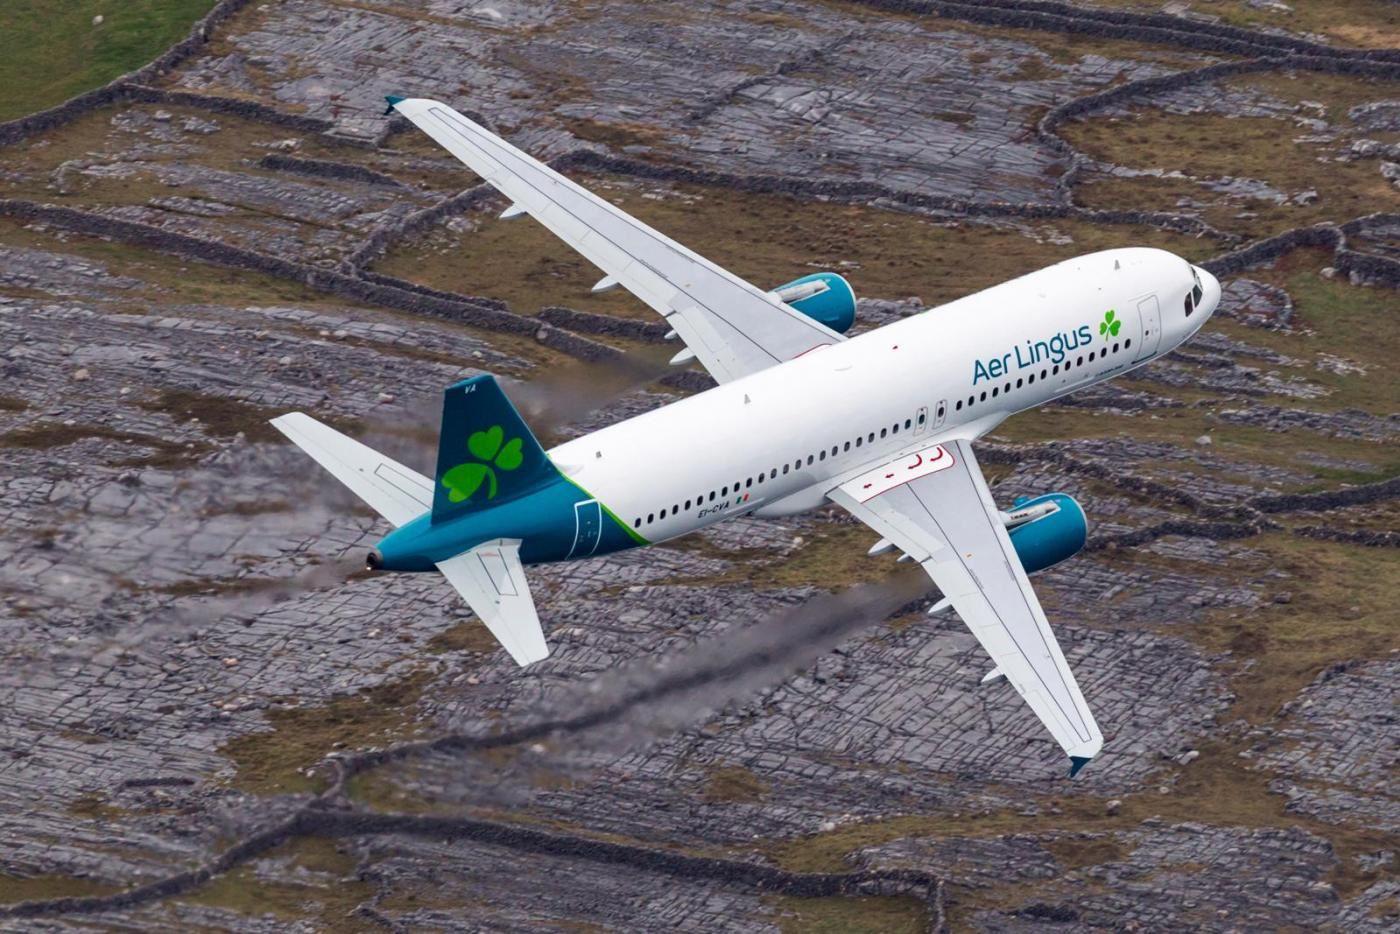 Aer Lingus Rolls Out Updated Brand with New Logo and Livery